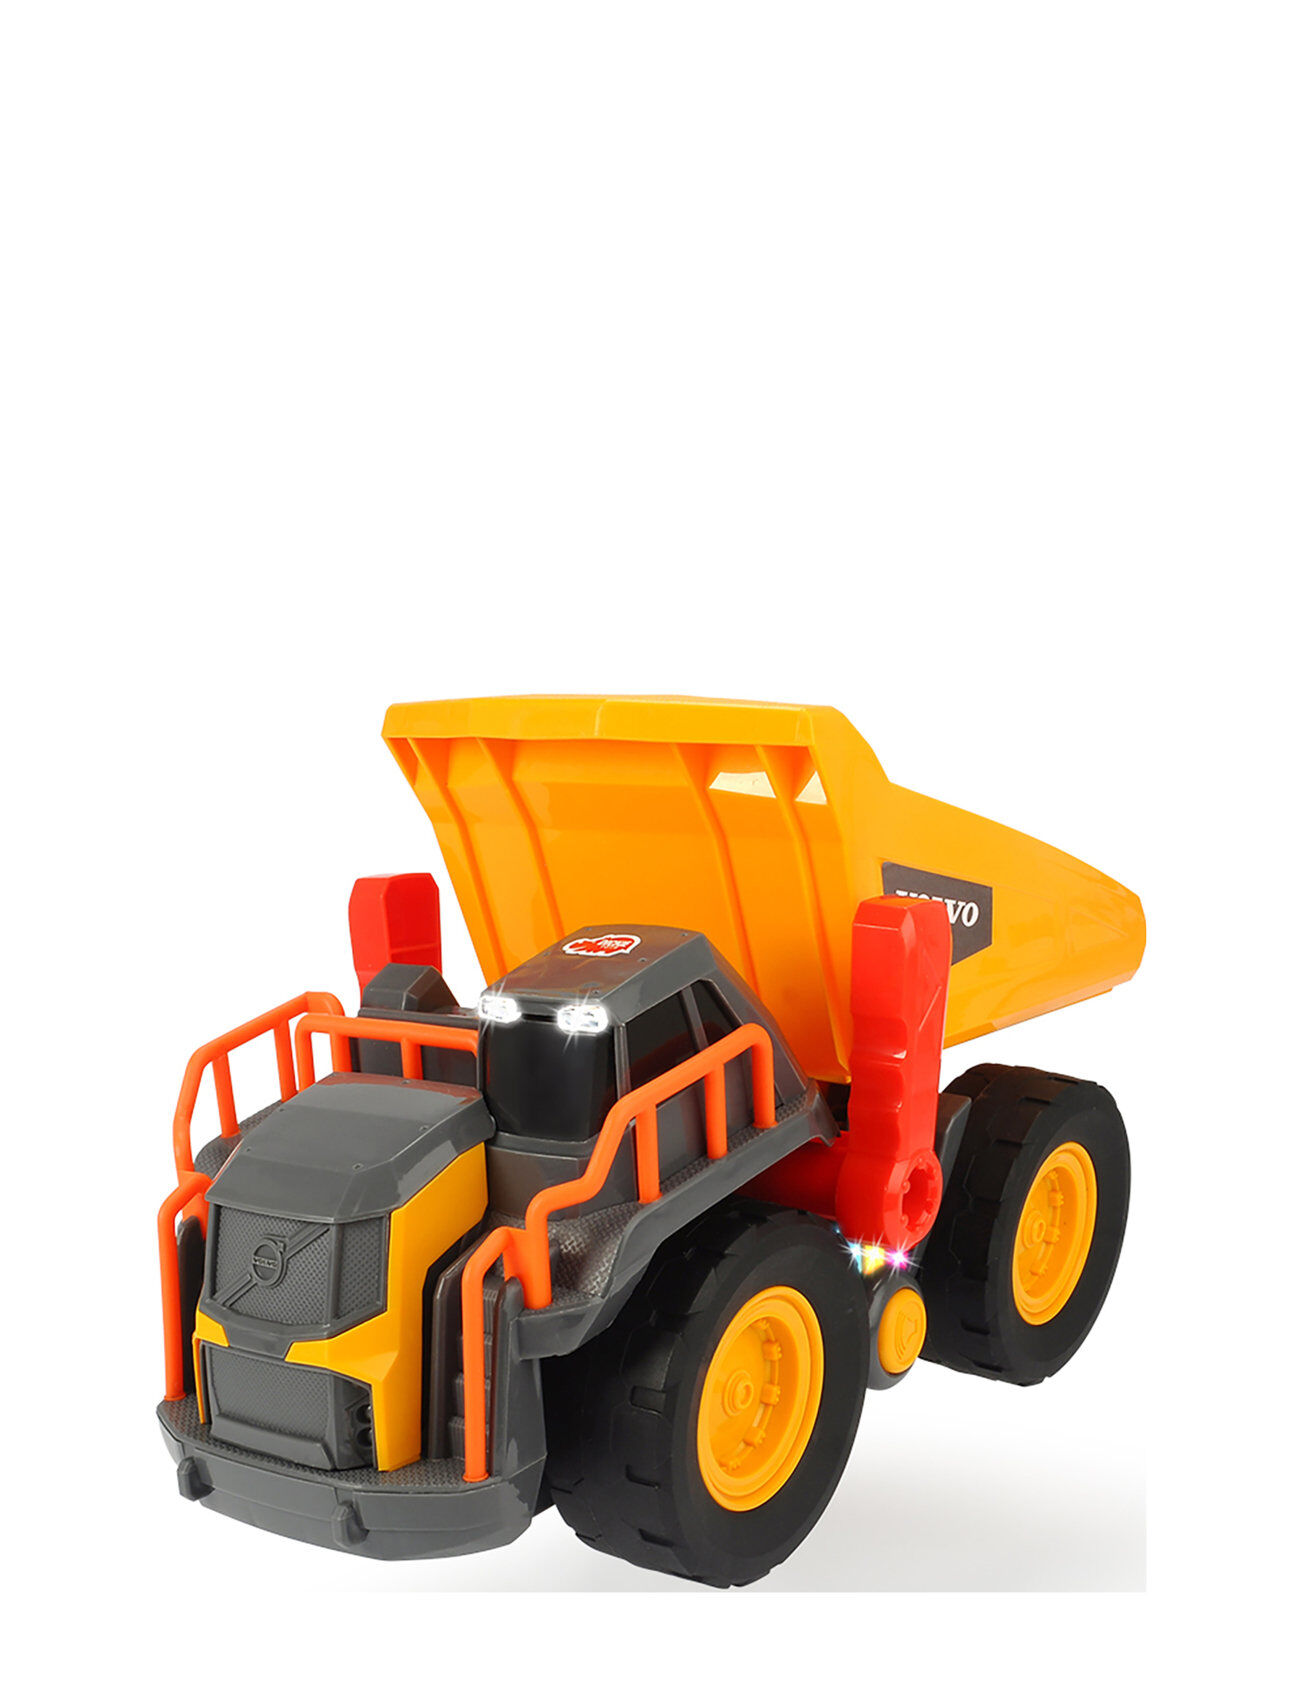 Dickie Toys Volvo Weight Lift Truck Toys Toy Cars & Vehicles Toy Vehicles Oransje Dickie Toys